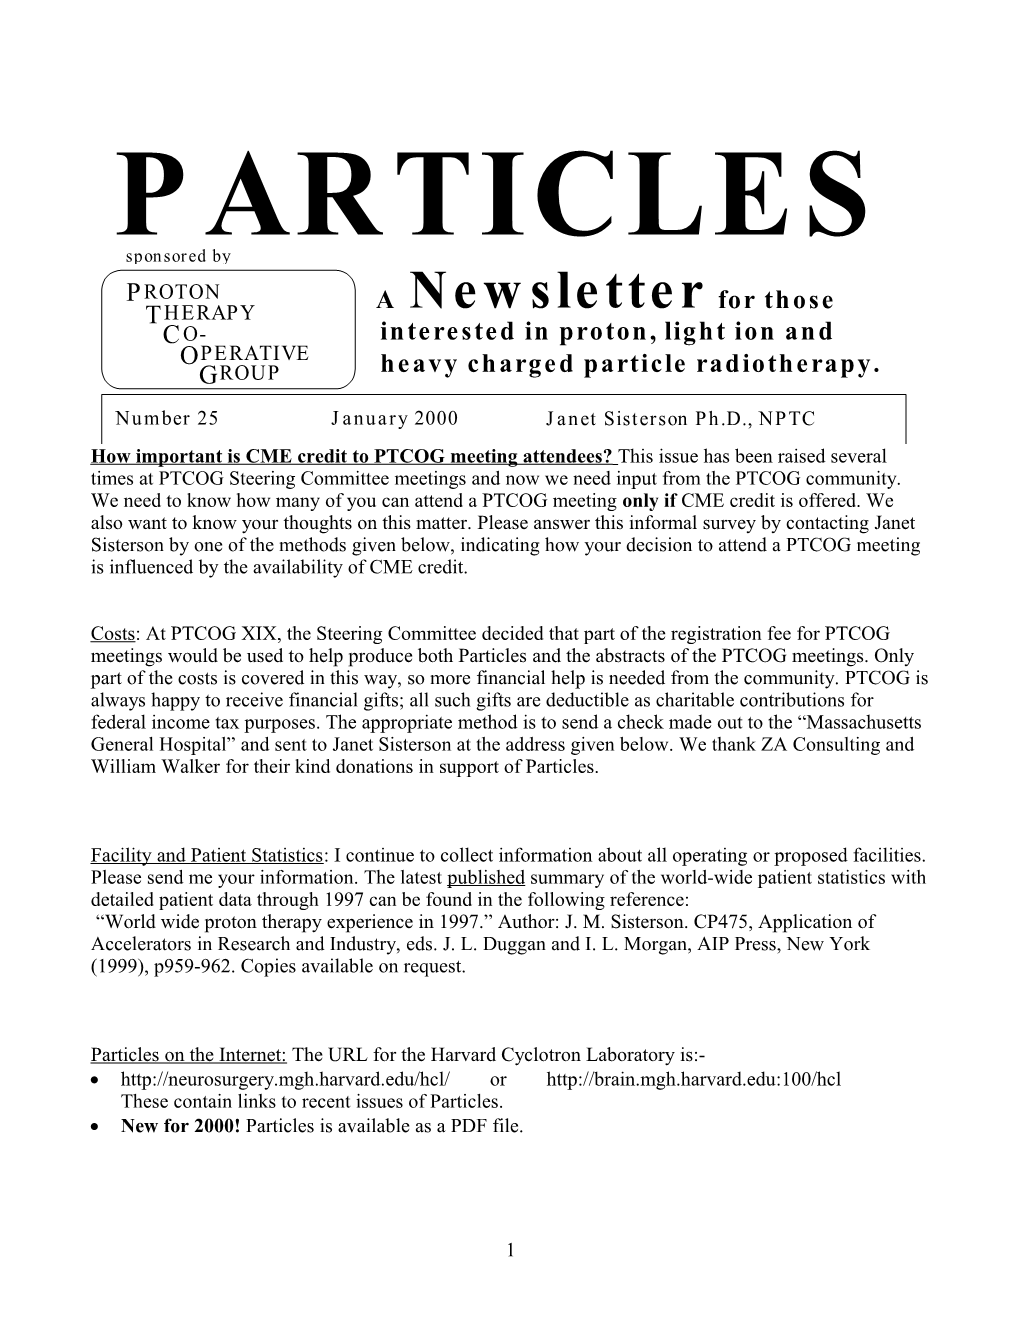 Particles on the Internet: the URL for the Harvard Cyclotron Laboratory Is